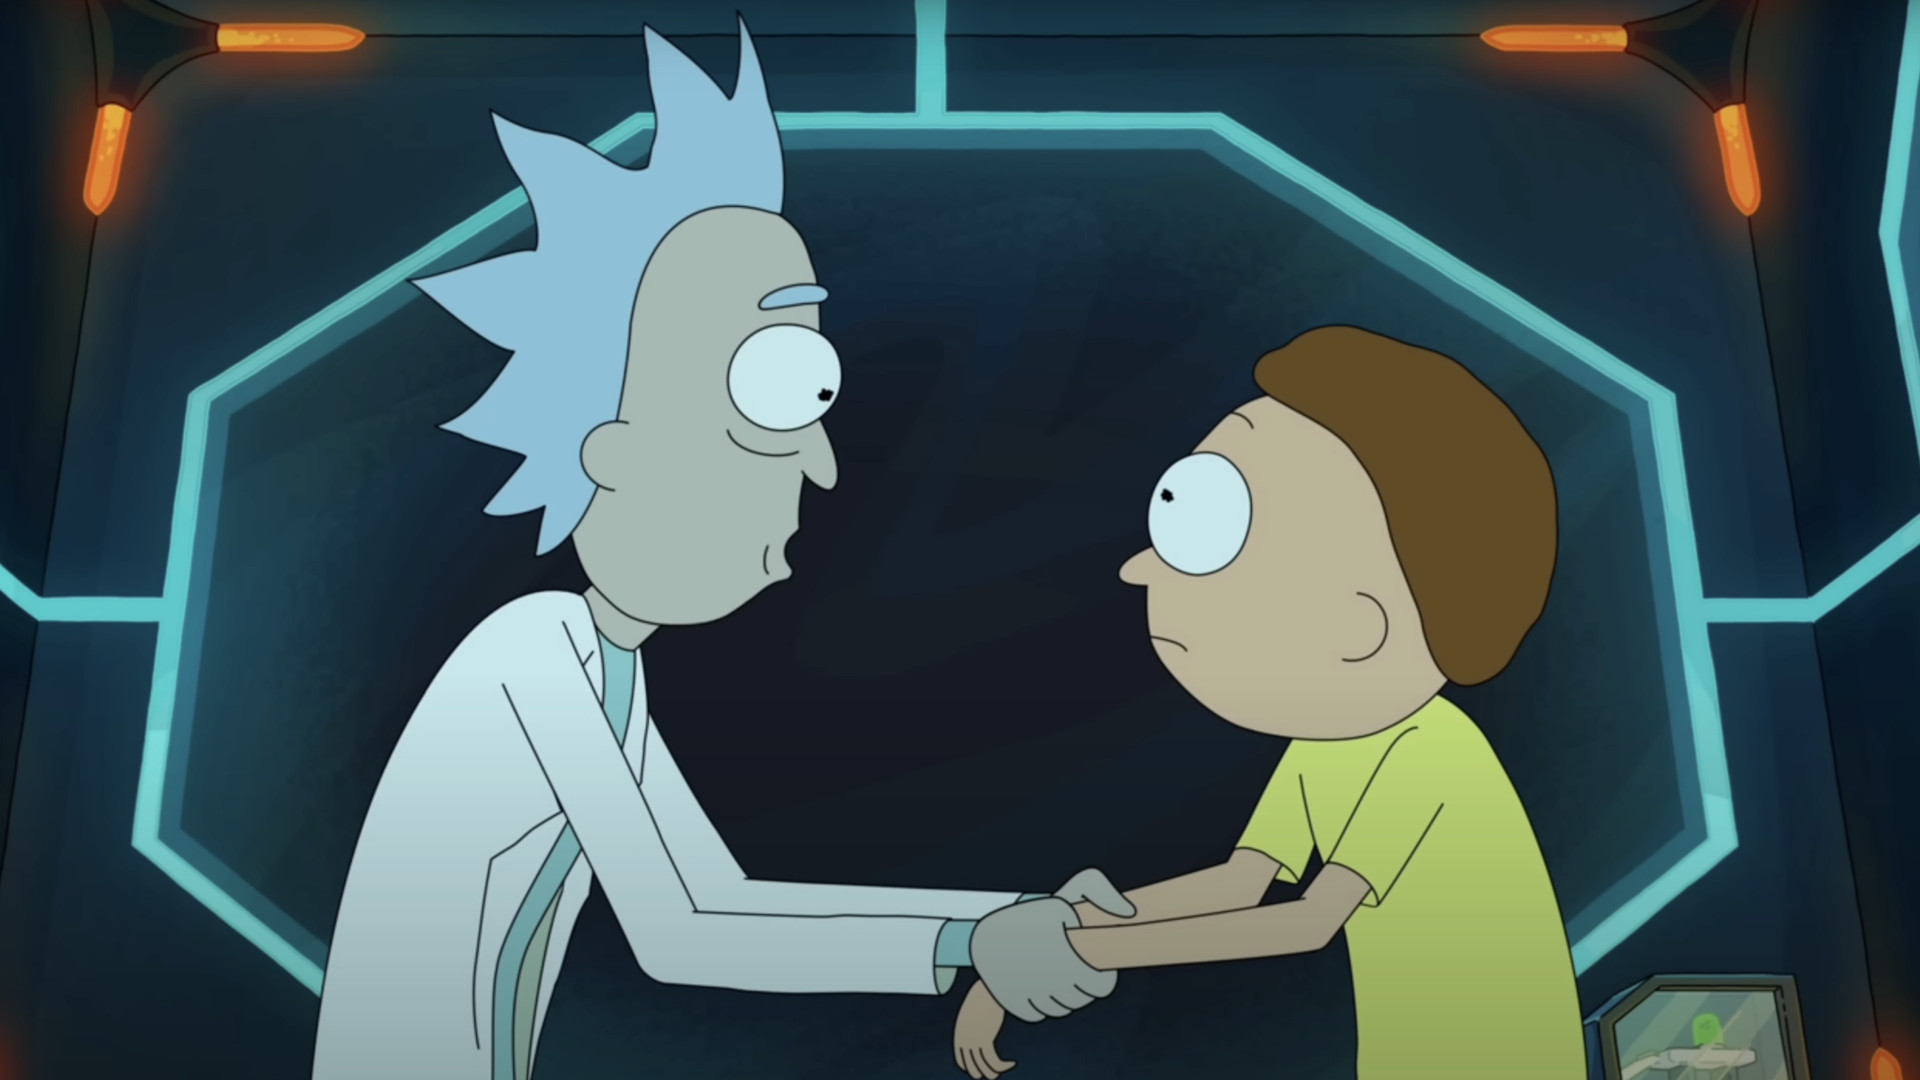 Rick And Morty Season 6 Looks Set To Land On Hbo Max Sooner Than You D Think Techradar